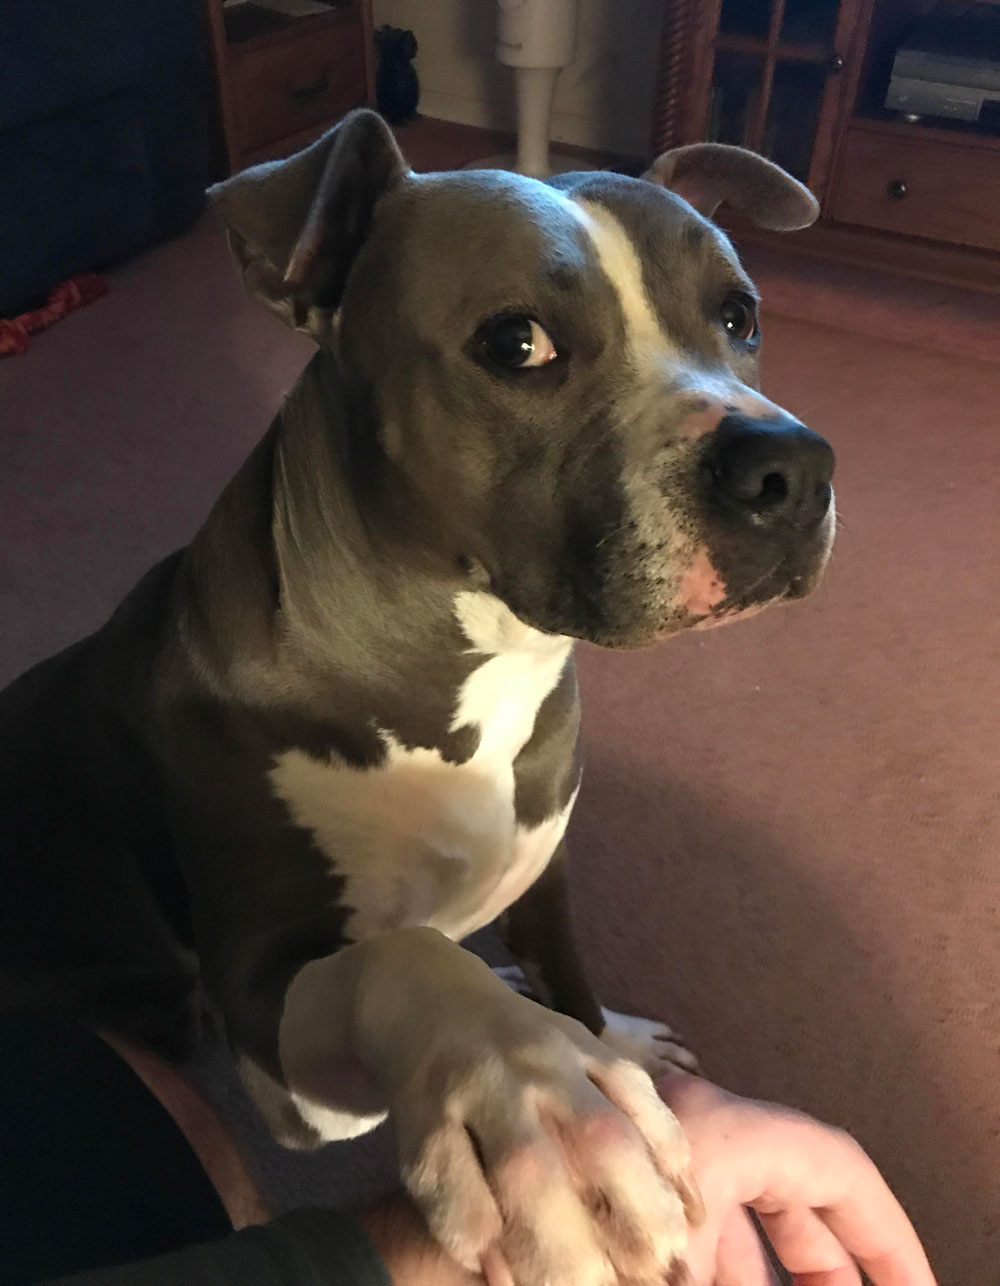 My mother and I were yelling at the TV during the hockey game, and my pit bull Bella got a little scared